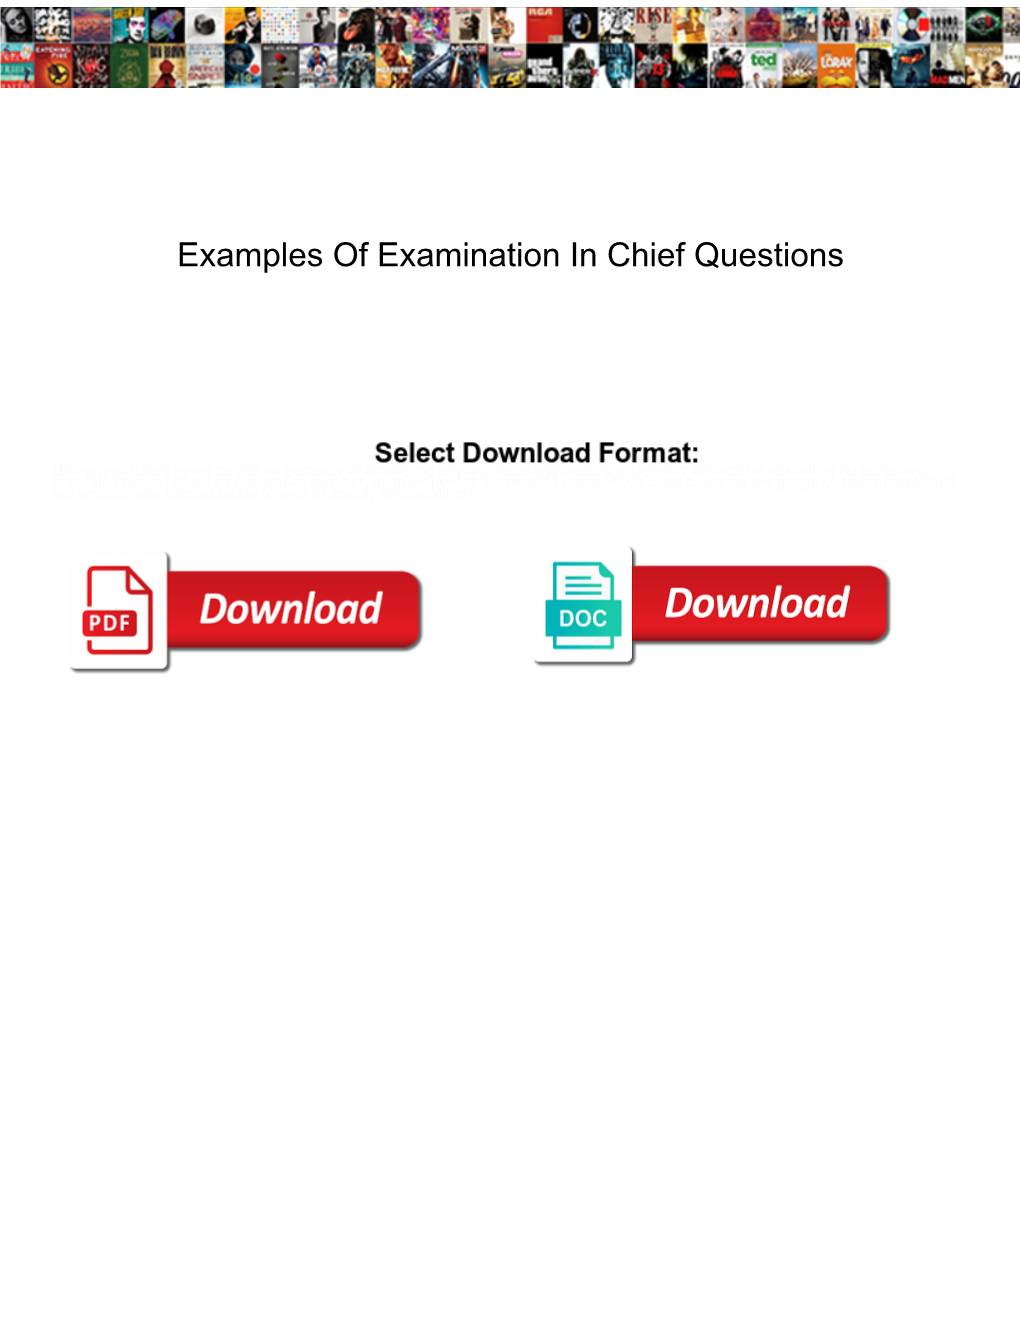 Examples of Examination in Chief Questions